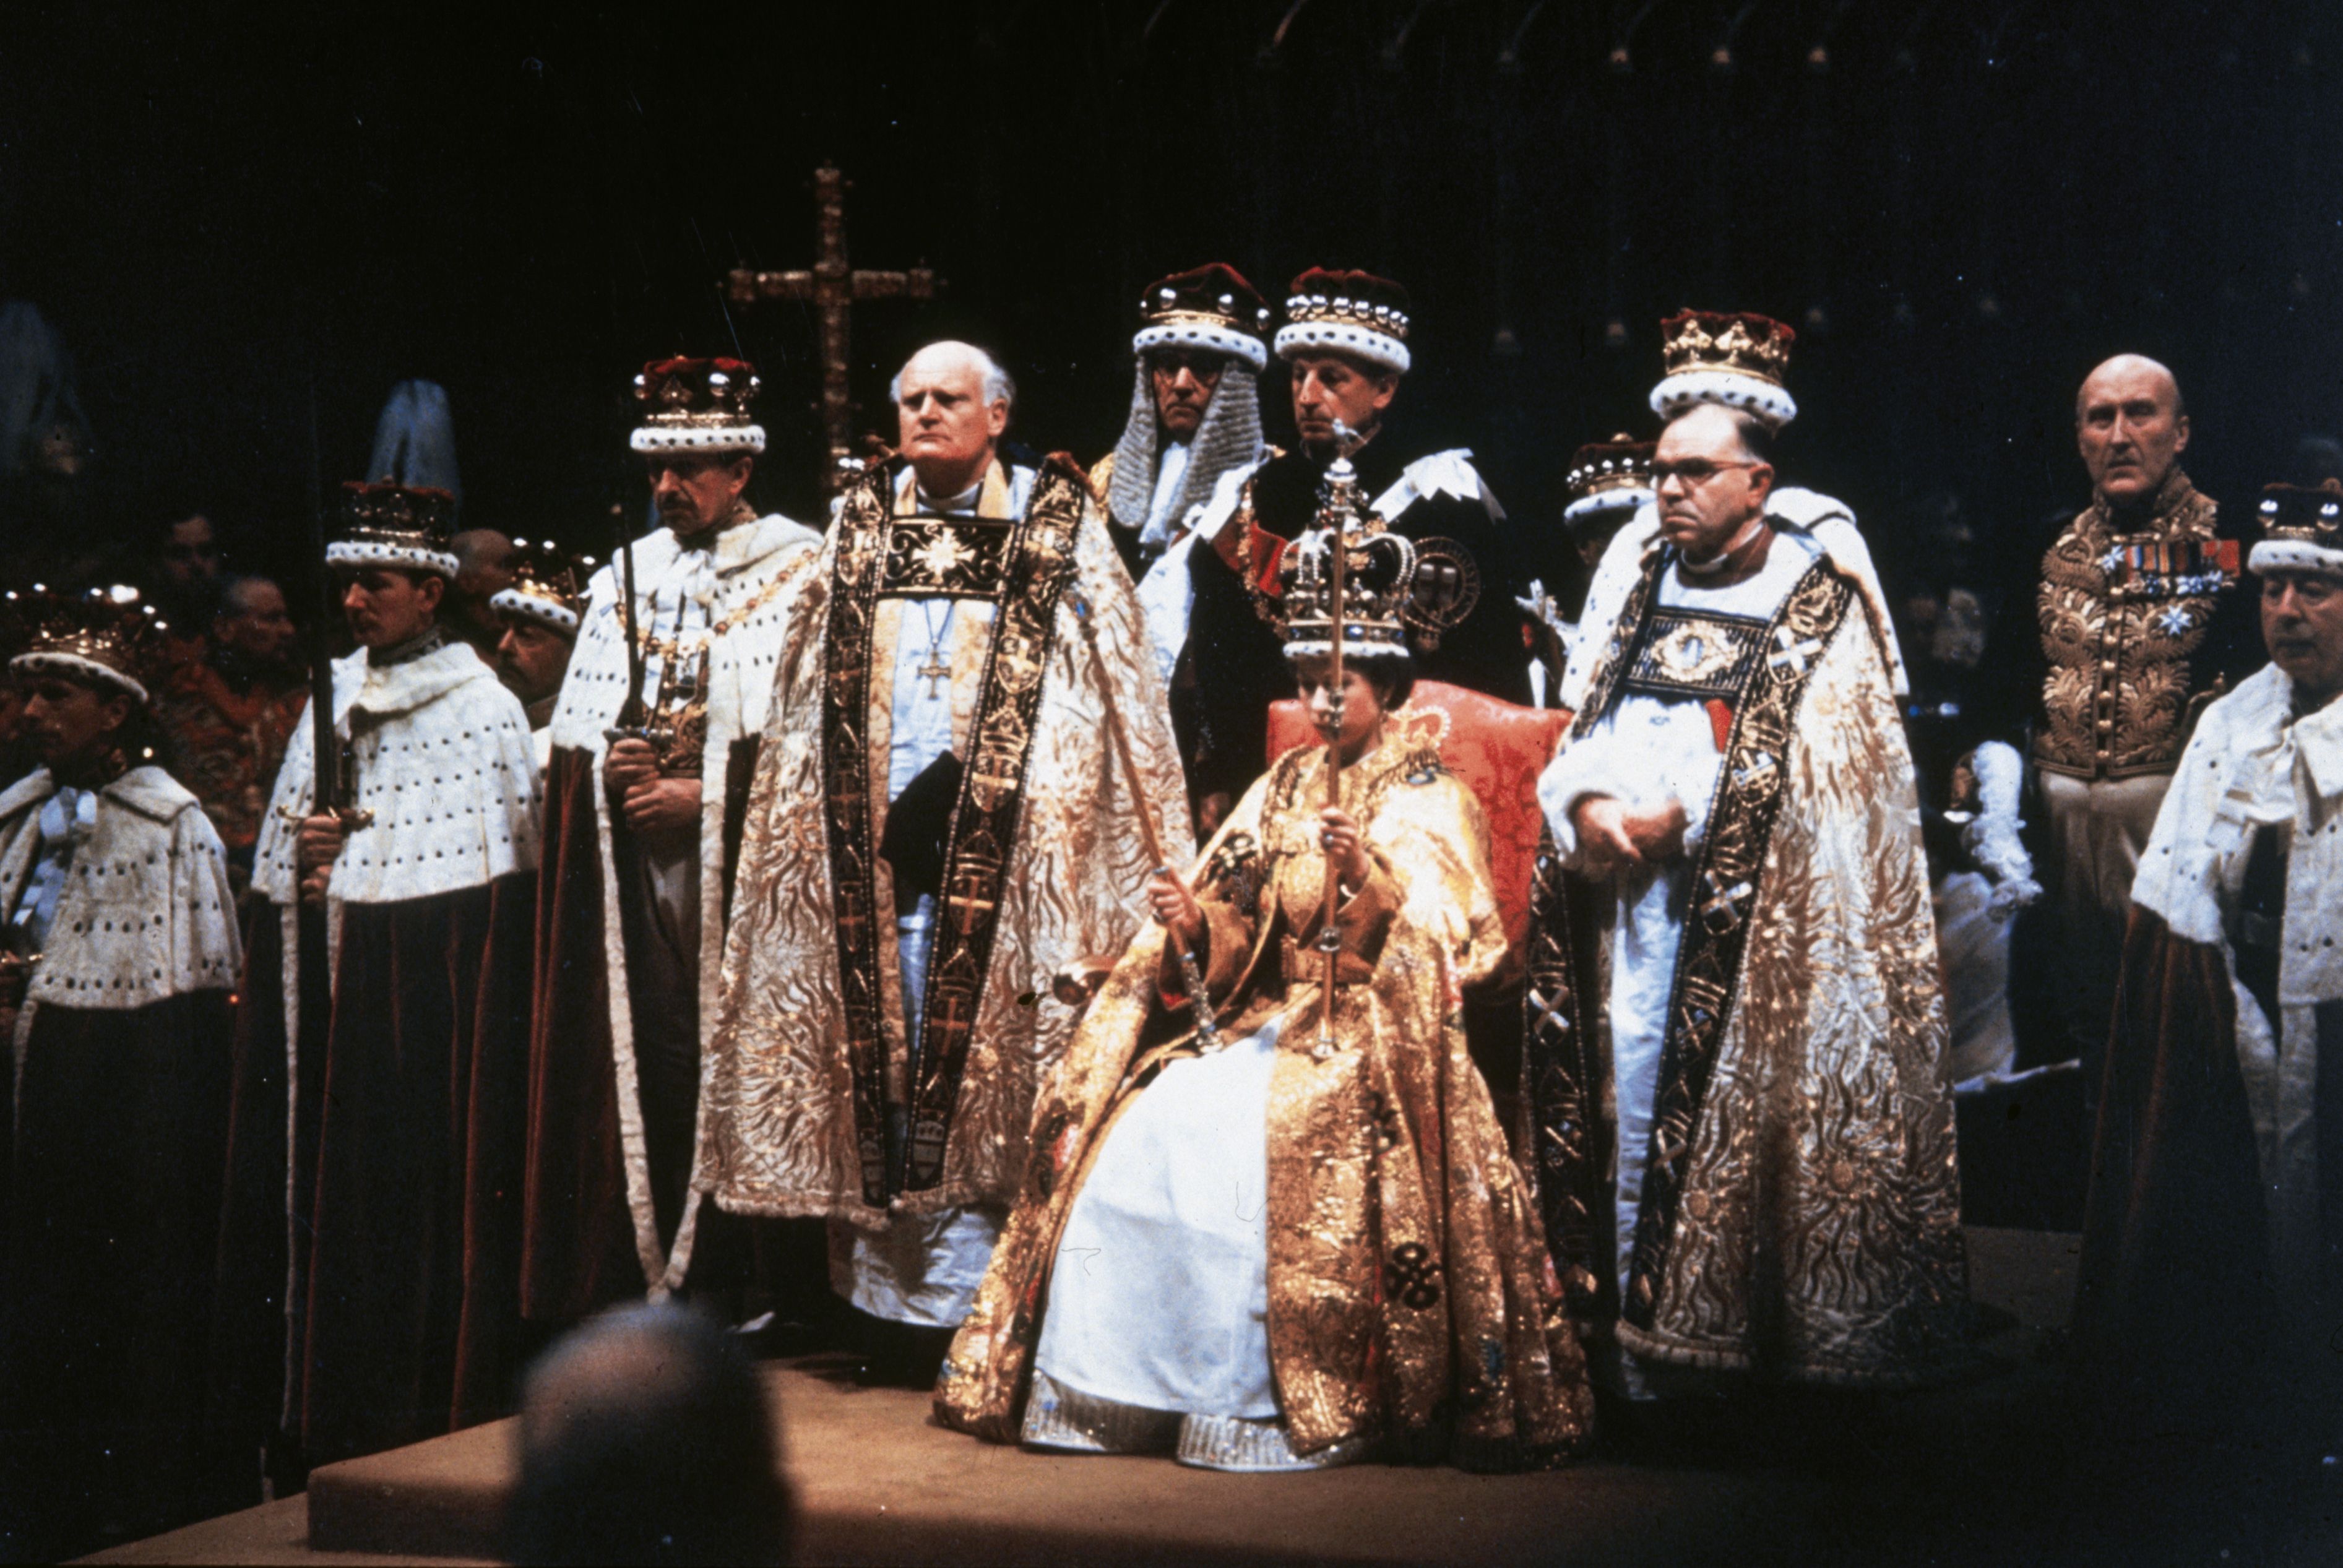 <p>Queen Elizabeth II was photographed during her official coronation ceremony at Westminster Abbey in London on June 2, 1953 -- a little more than a year after she ascended the throne and became queen upon her father's death.</p>